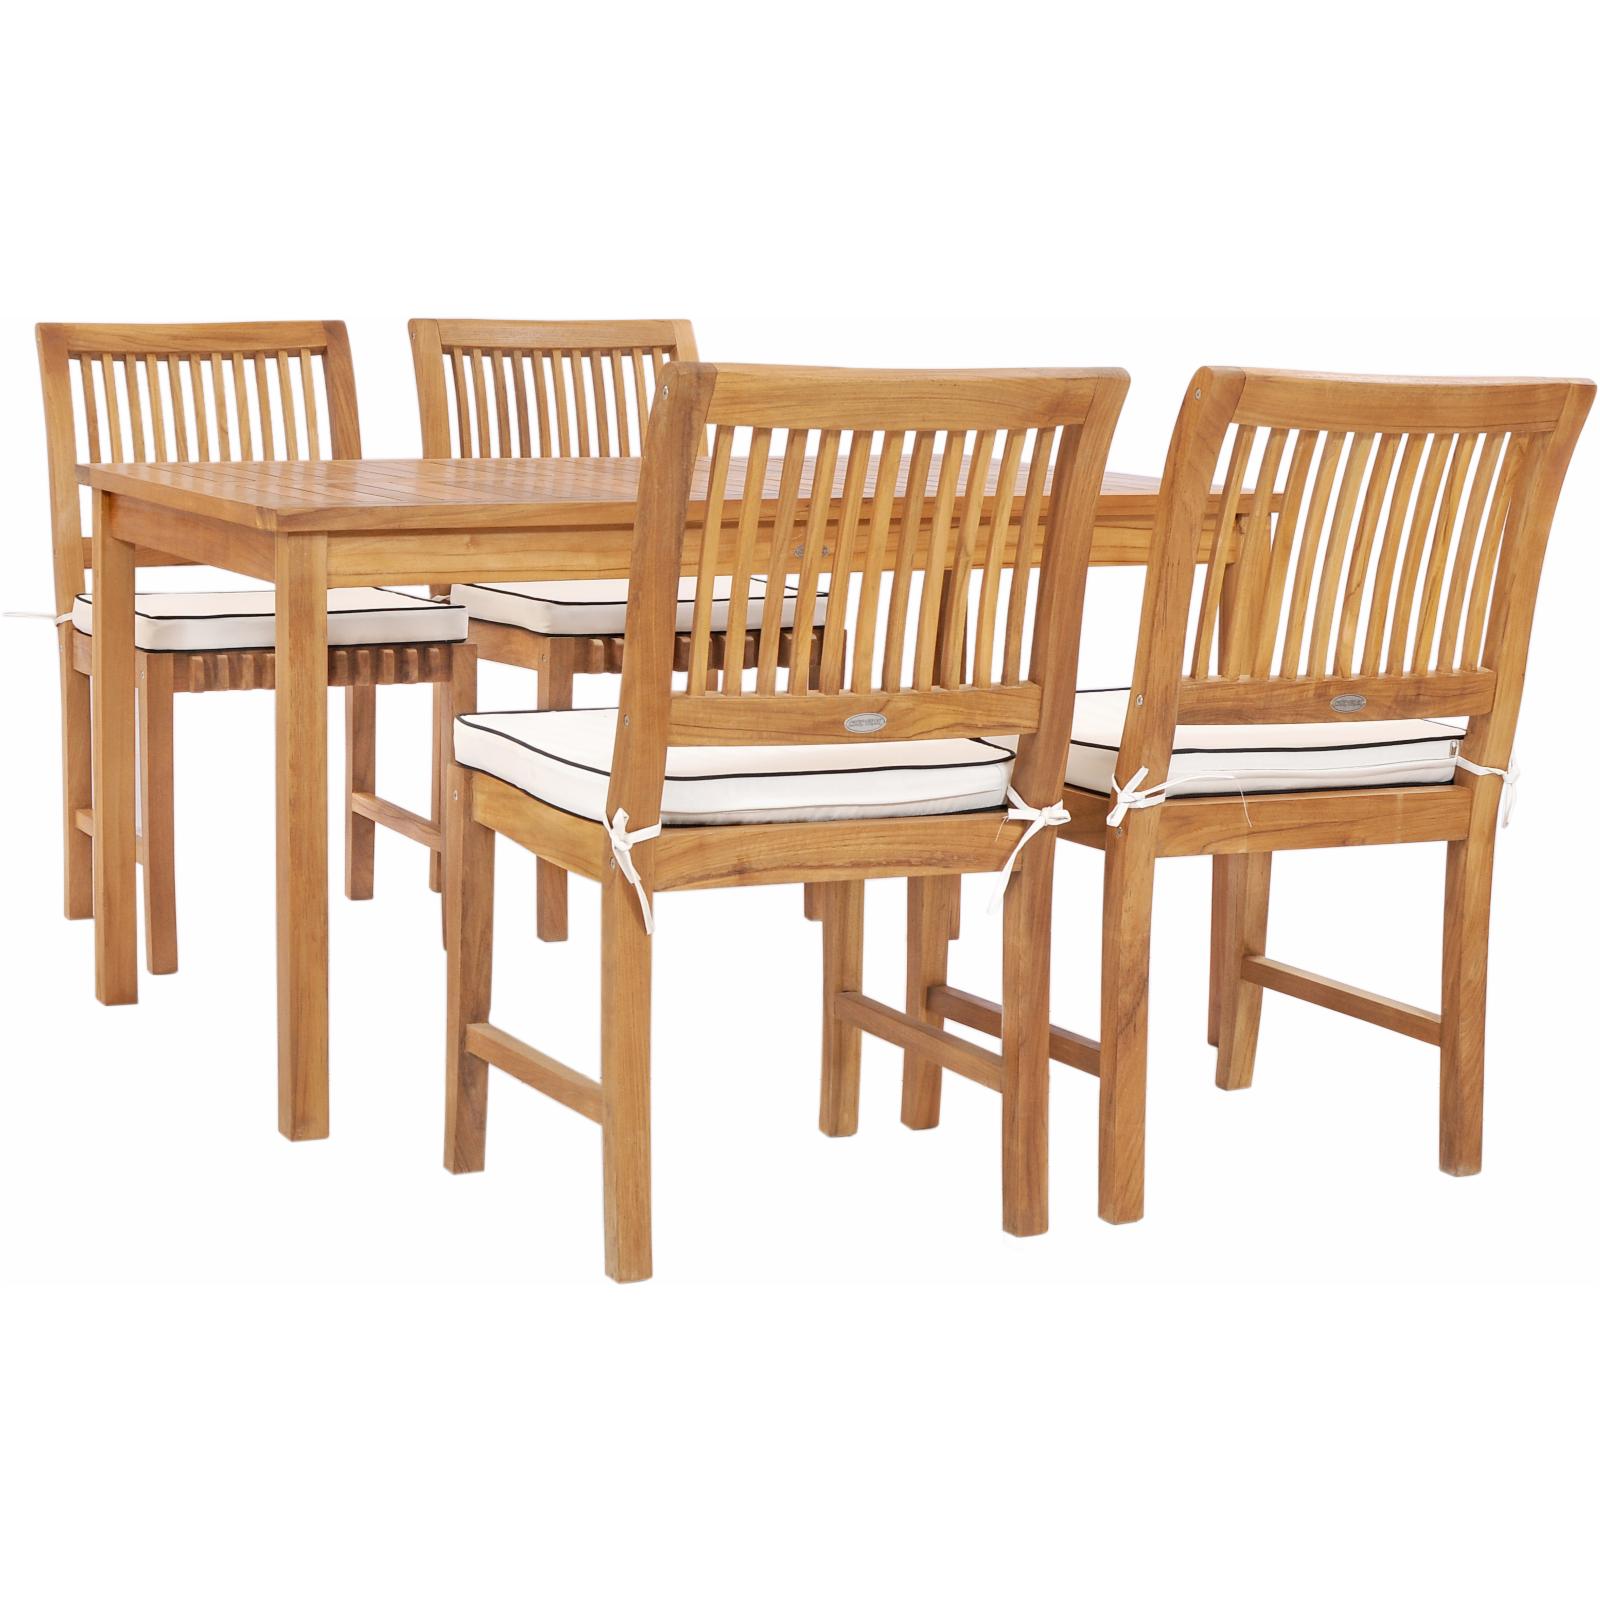 Chic Teak Bermuda 5 Piece Teak Wood Patio Dining Set with Side Chairs - image 1 of 5